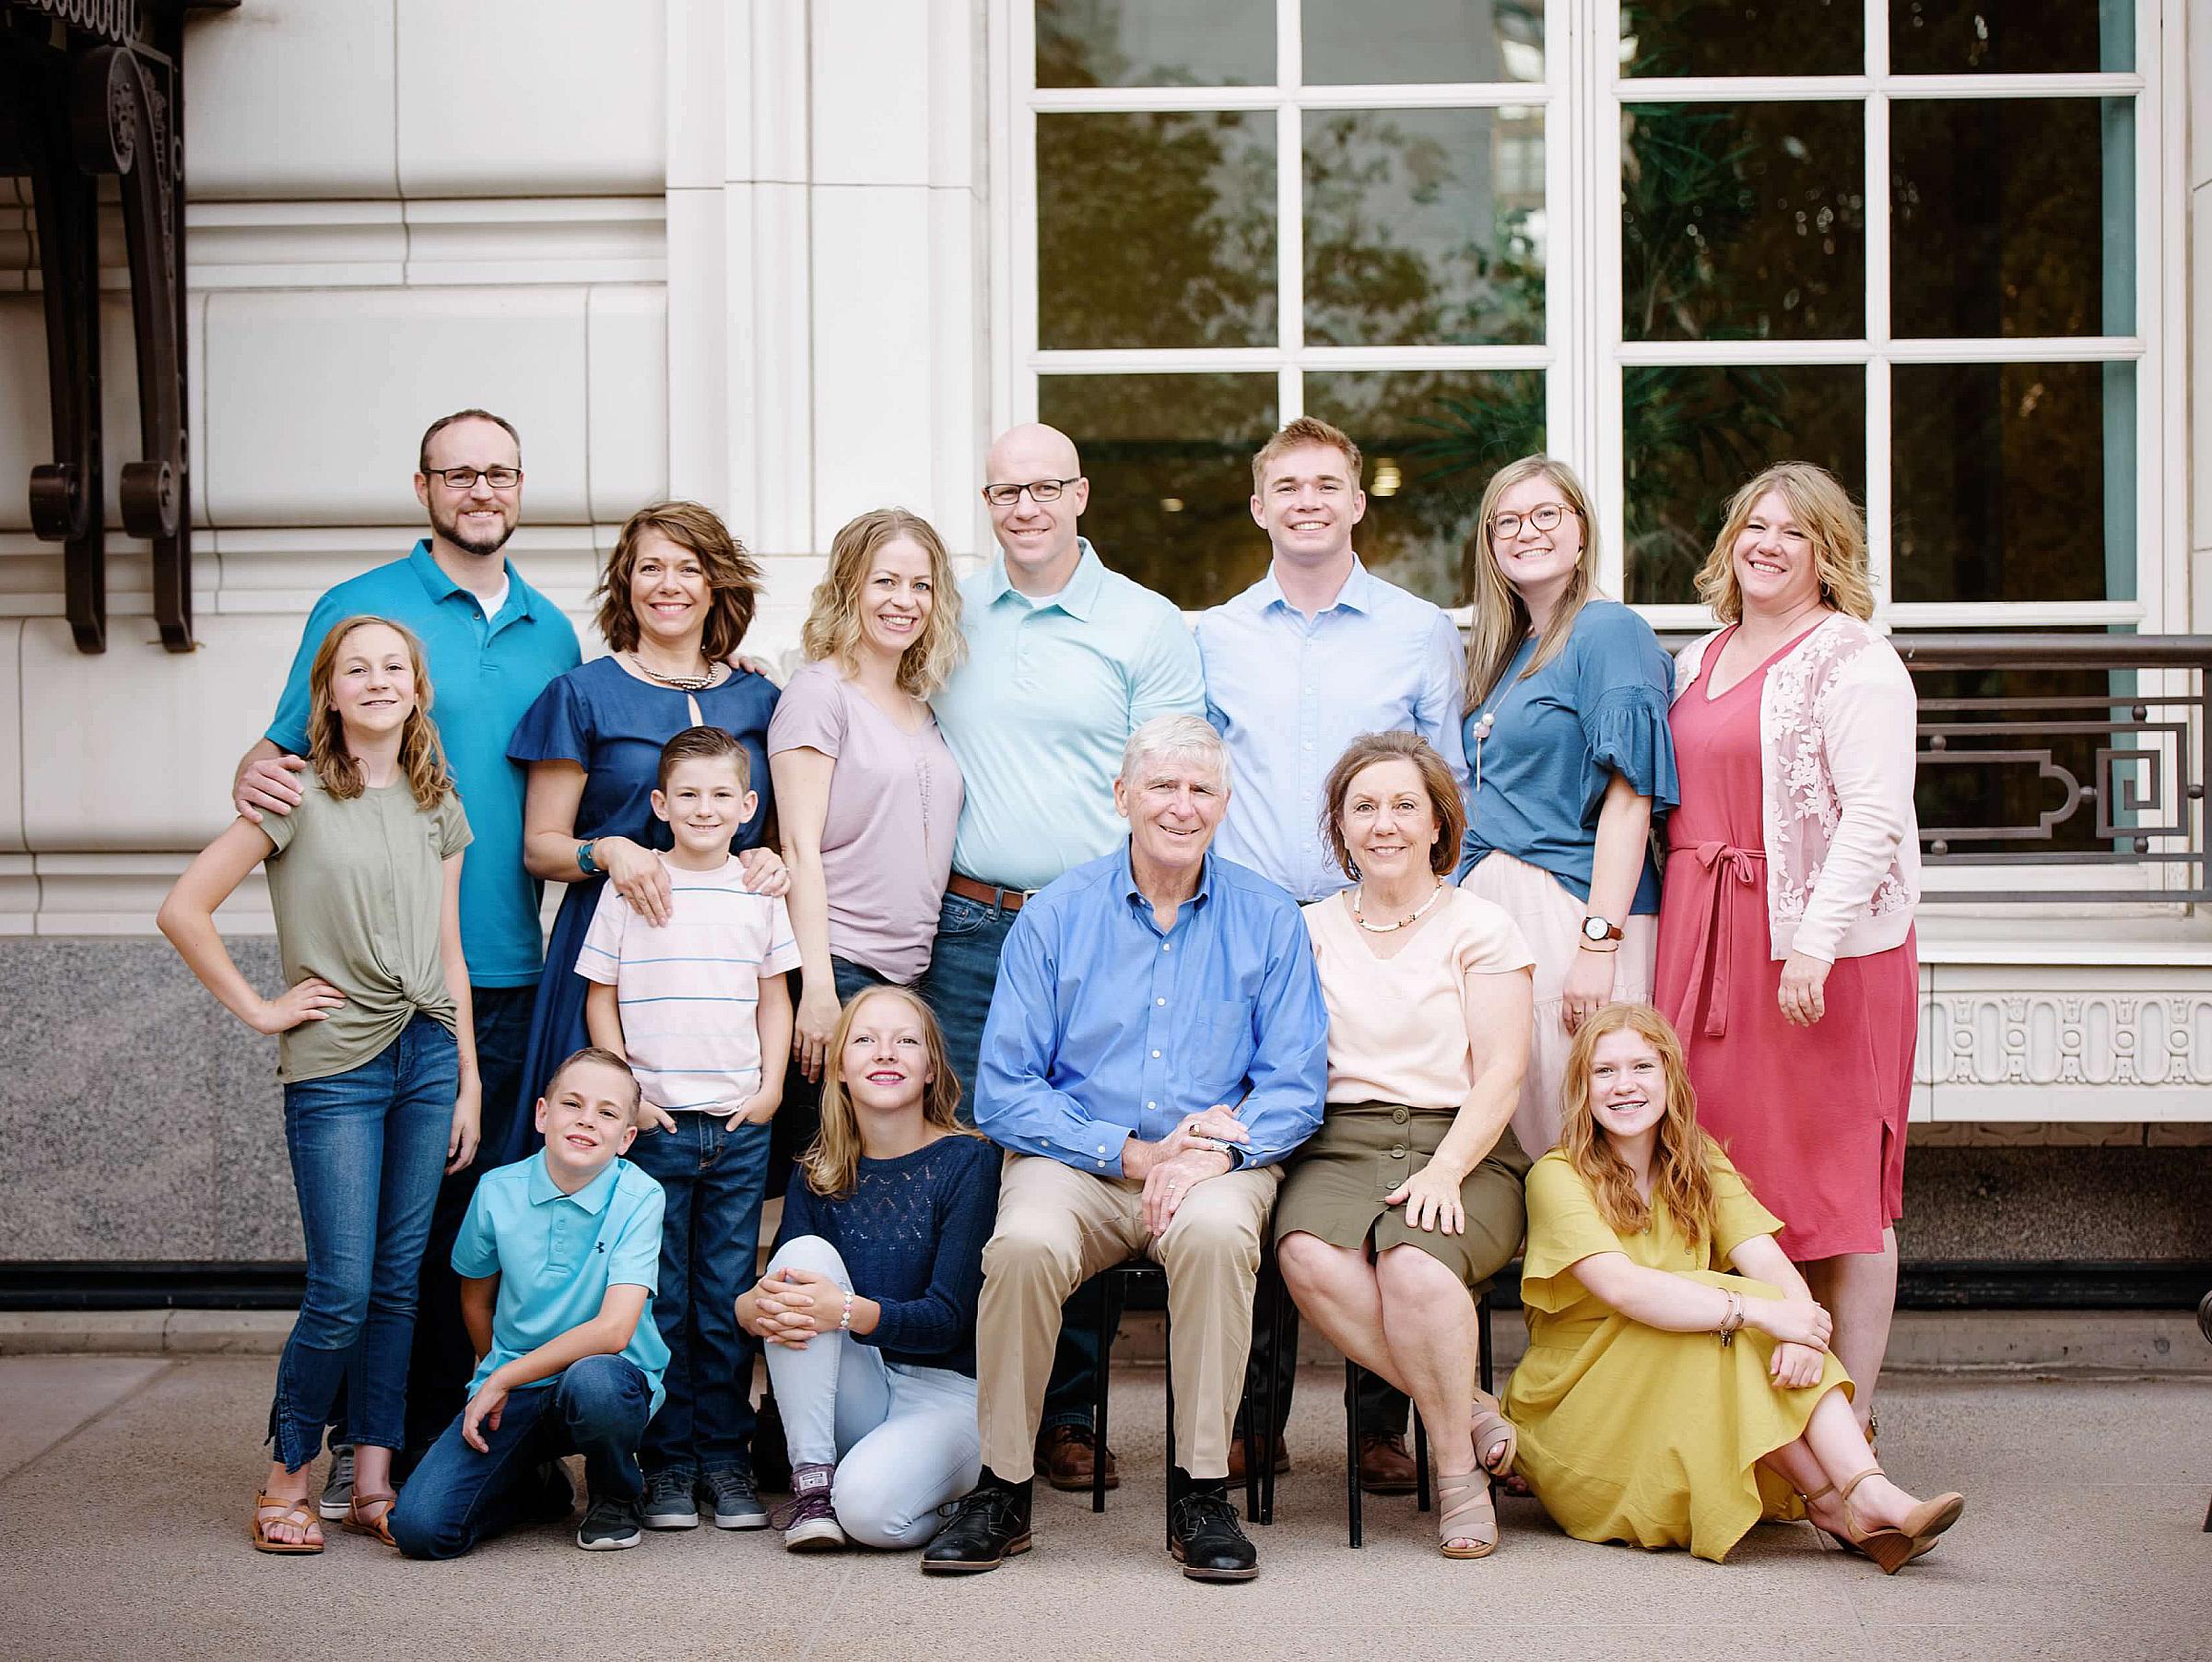 Jerry and Tad Simonson with their children and grandchildren, posing for a group photo.